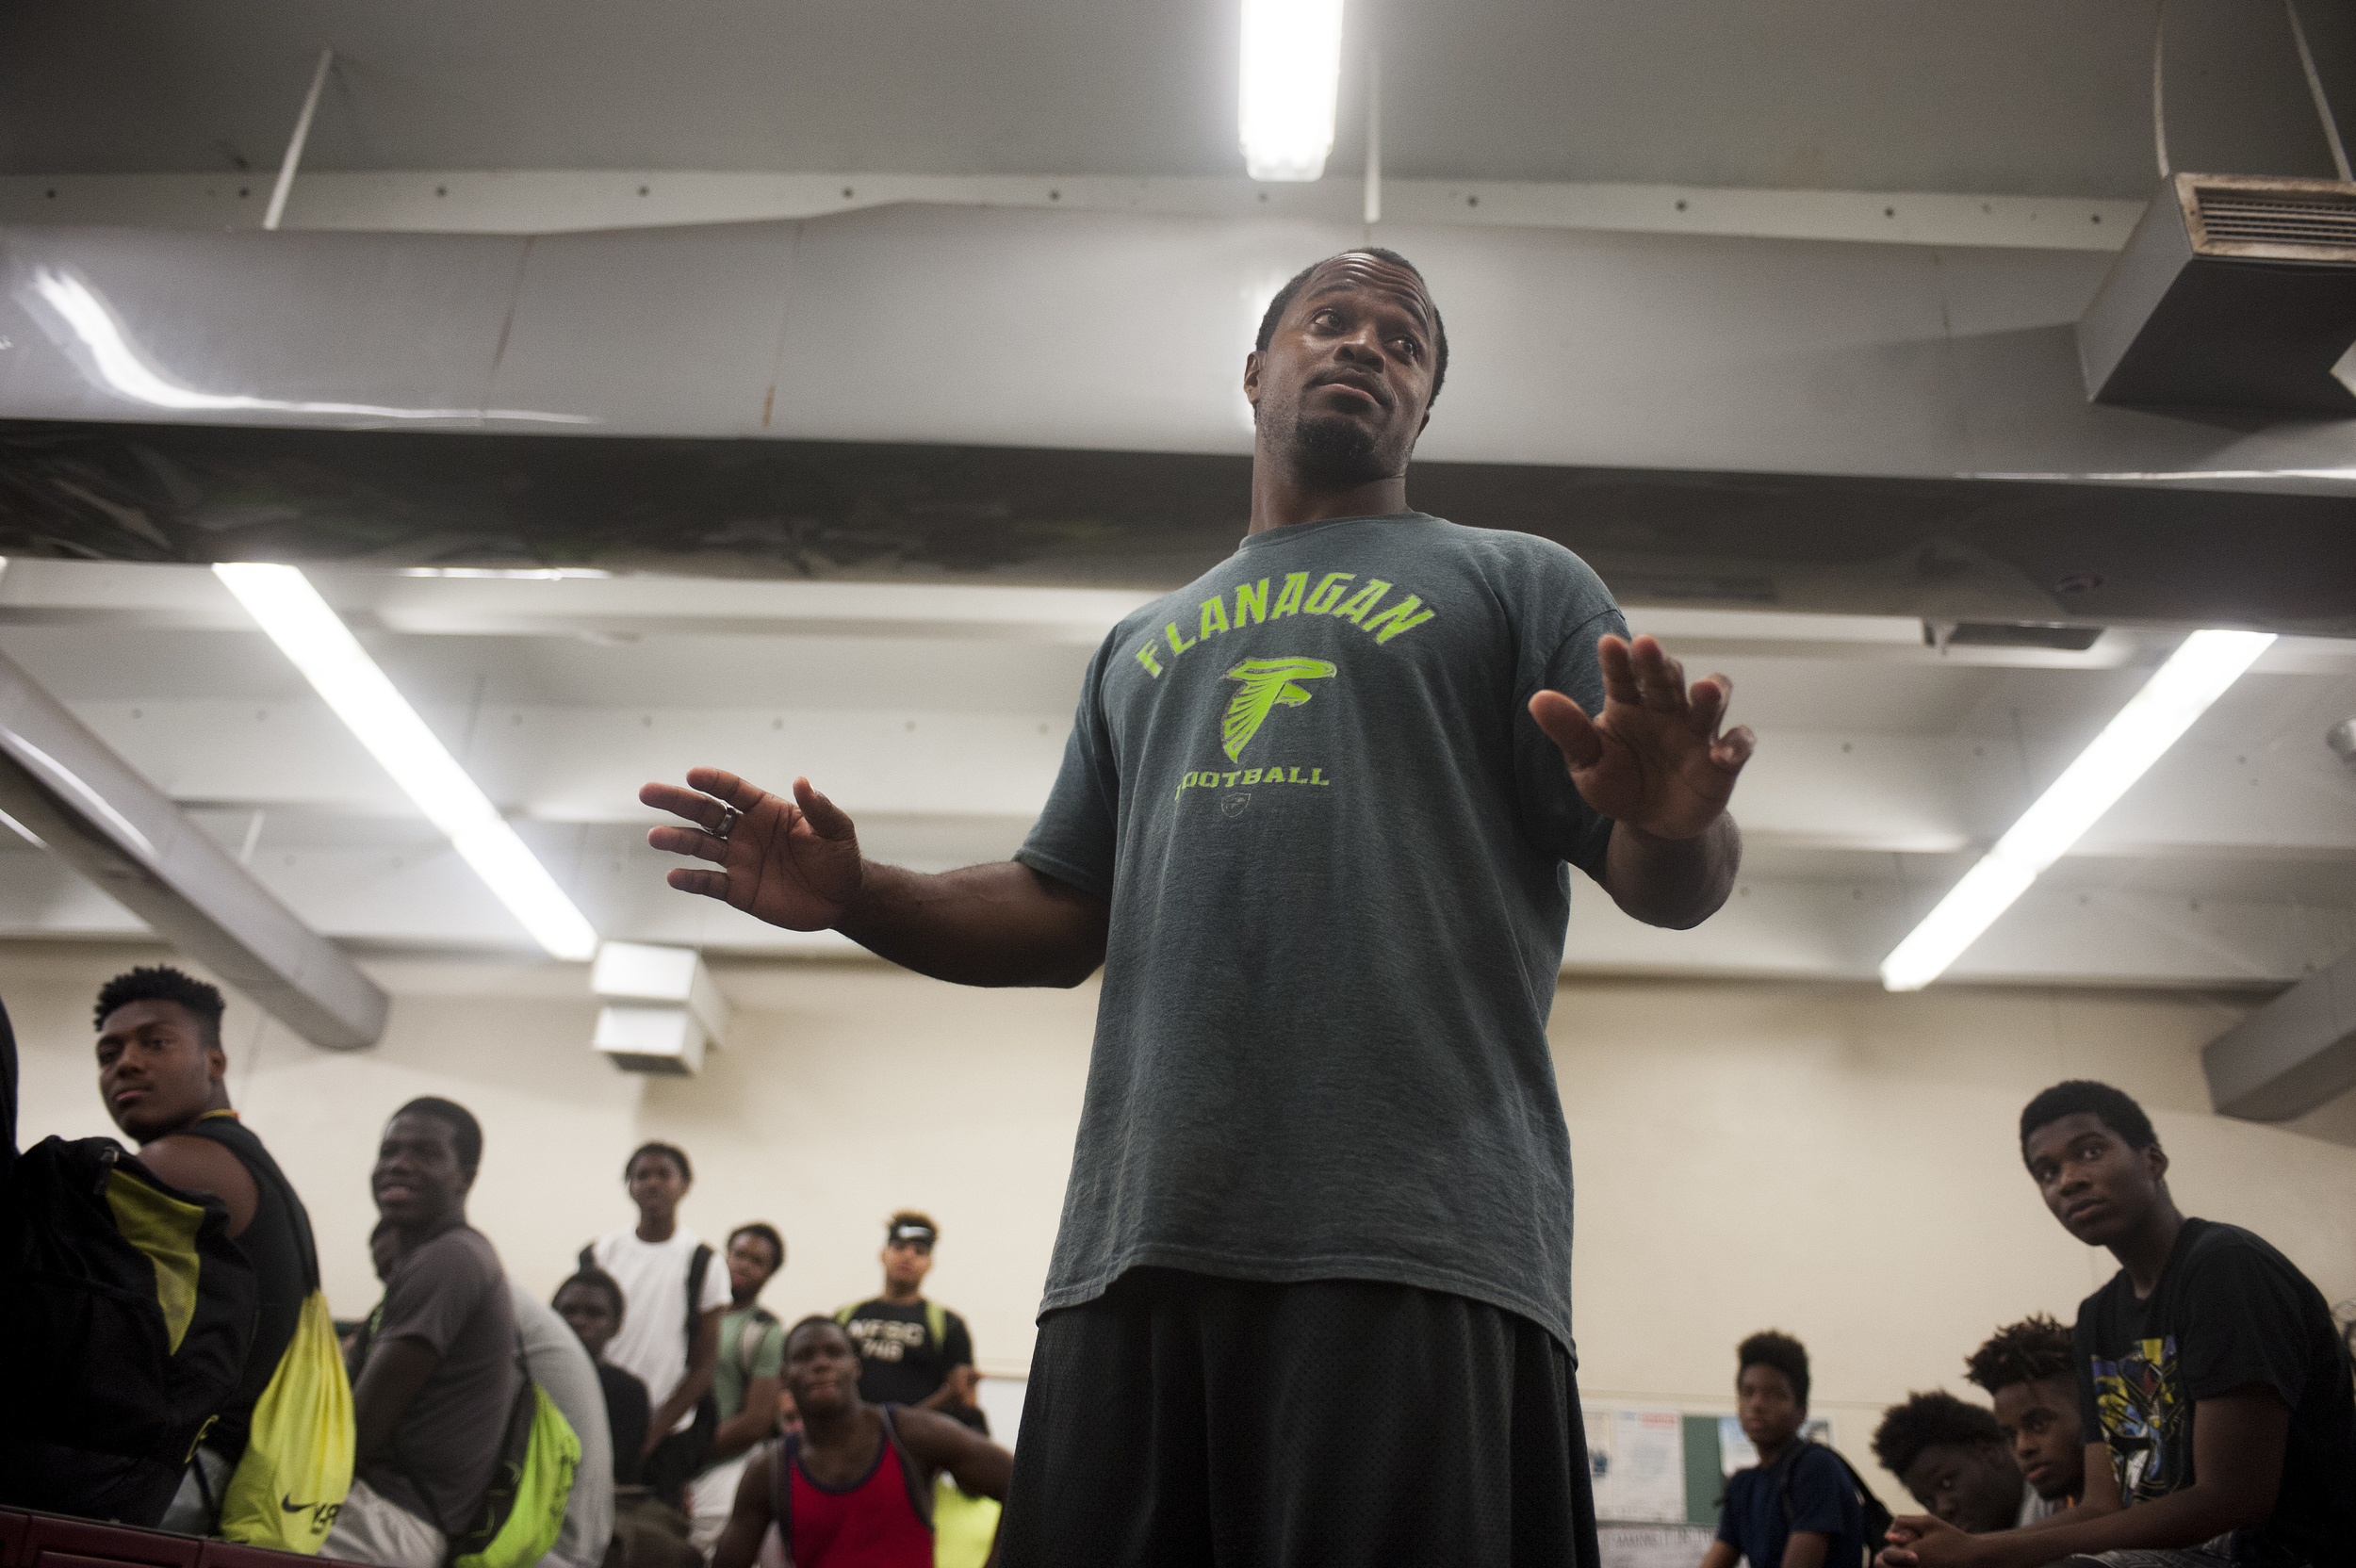  Flanagan high school head coach Stanford Samuel II talks to his team int he locker room during the first practice of the high school football season at Flanagan High School on Monday, Aug. 1, 2016. The reigning state champions look to repeat again d